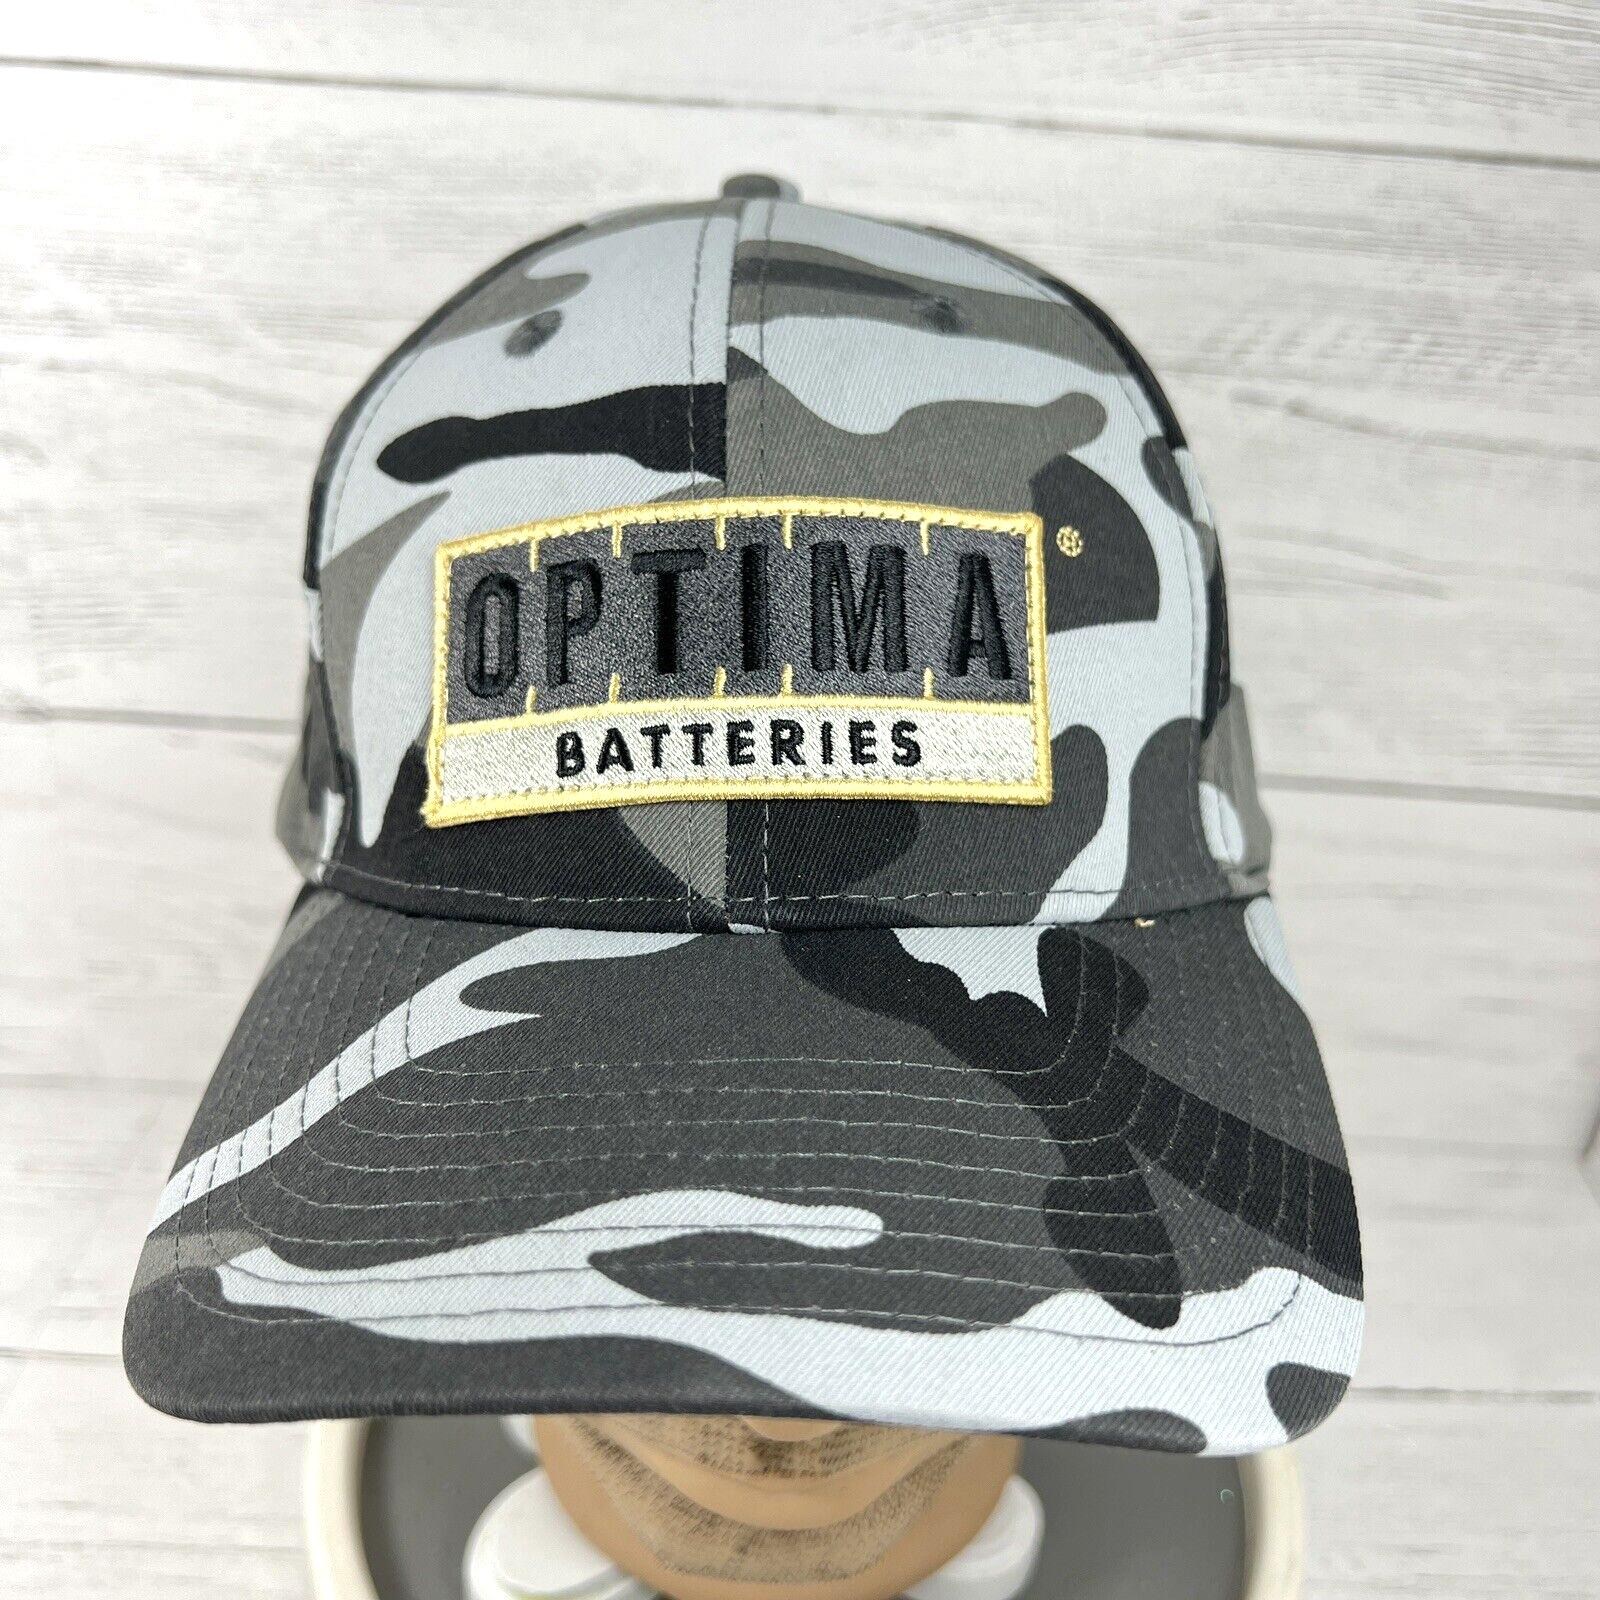 Primary image for Optima Batteries Baseball Hat Cap Camouflage Stretch Fit Embroidered